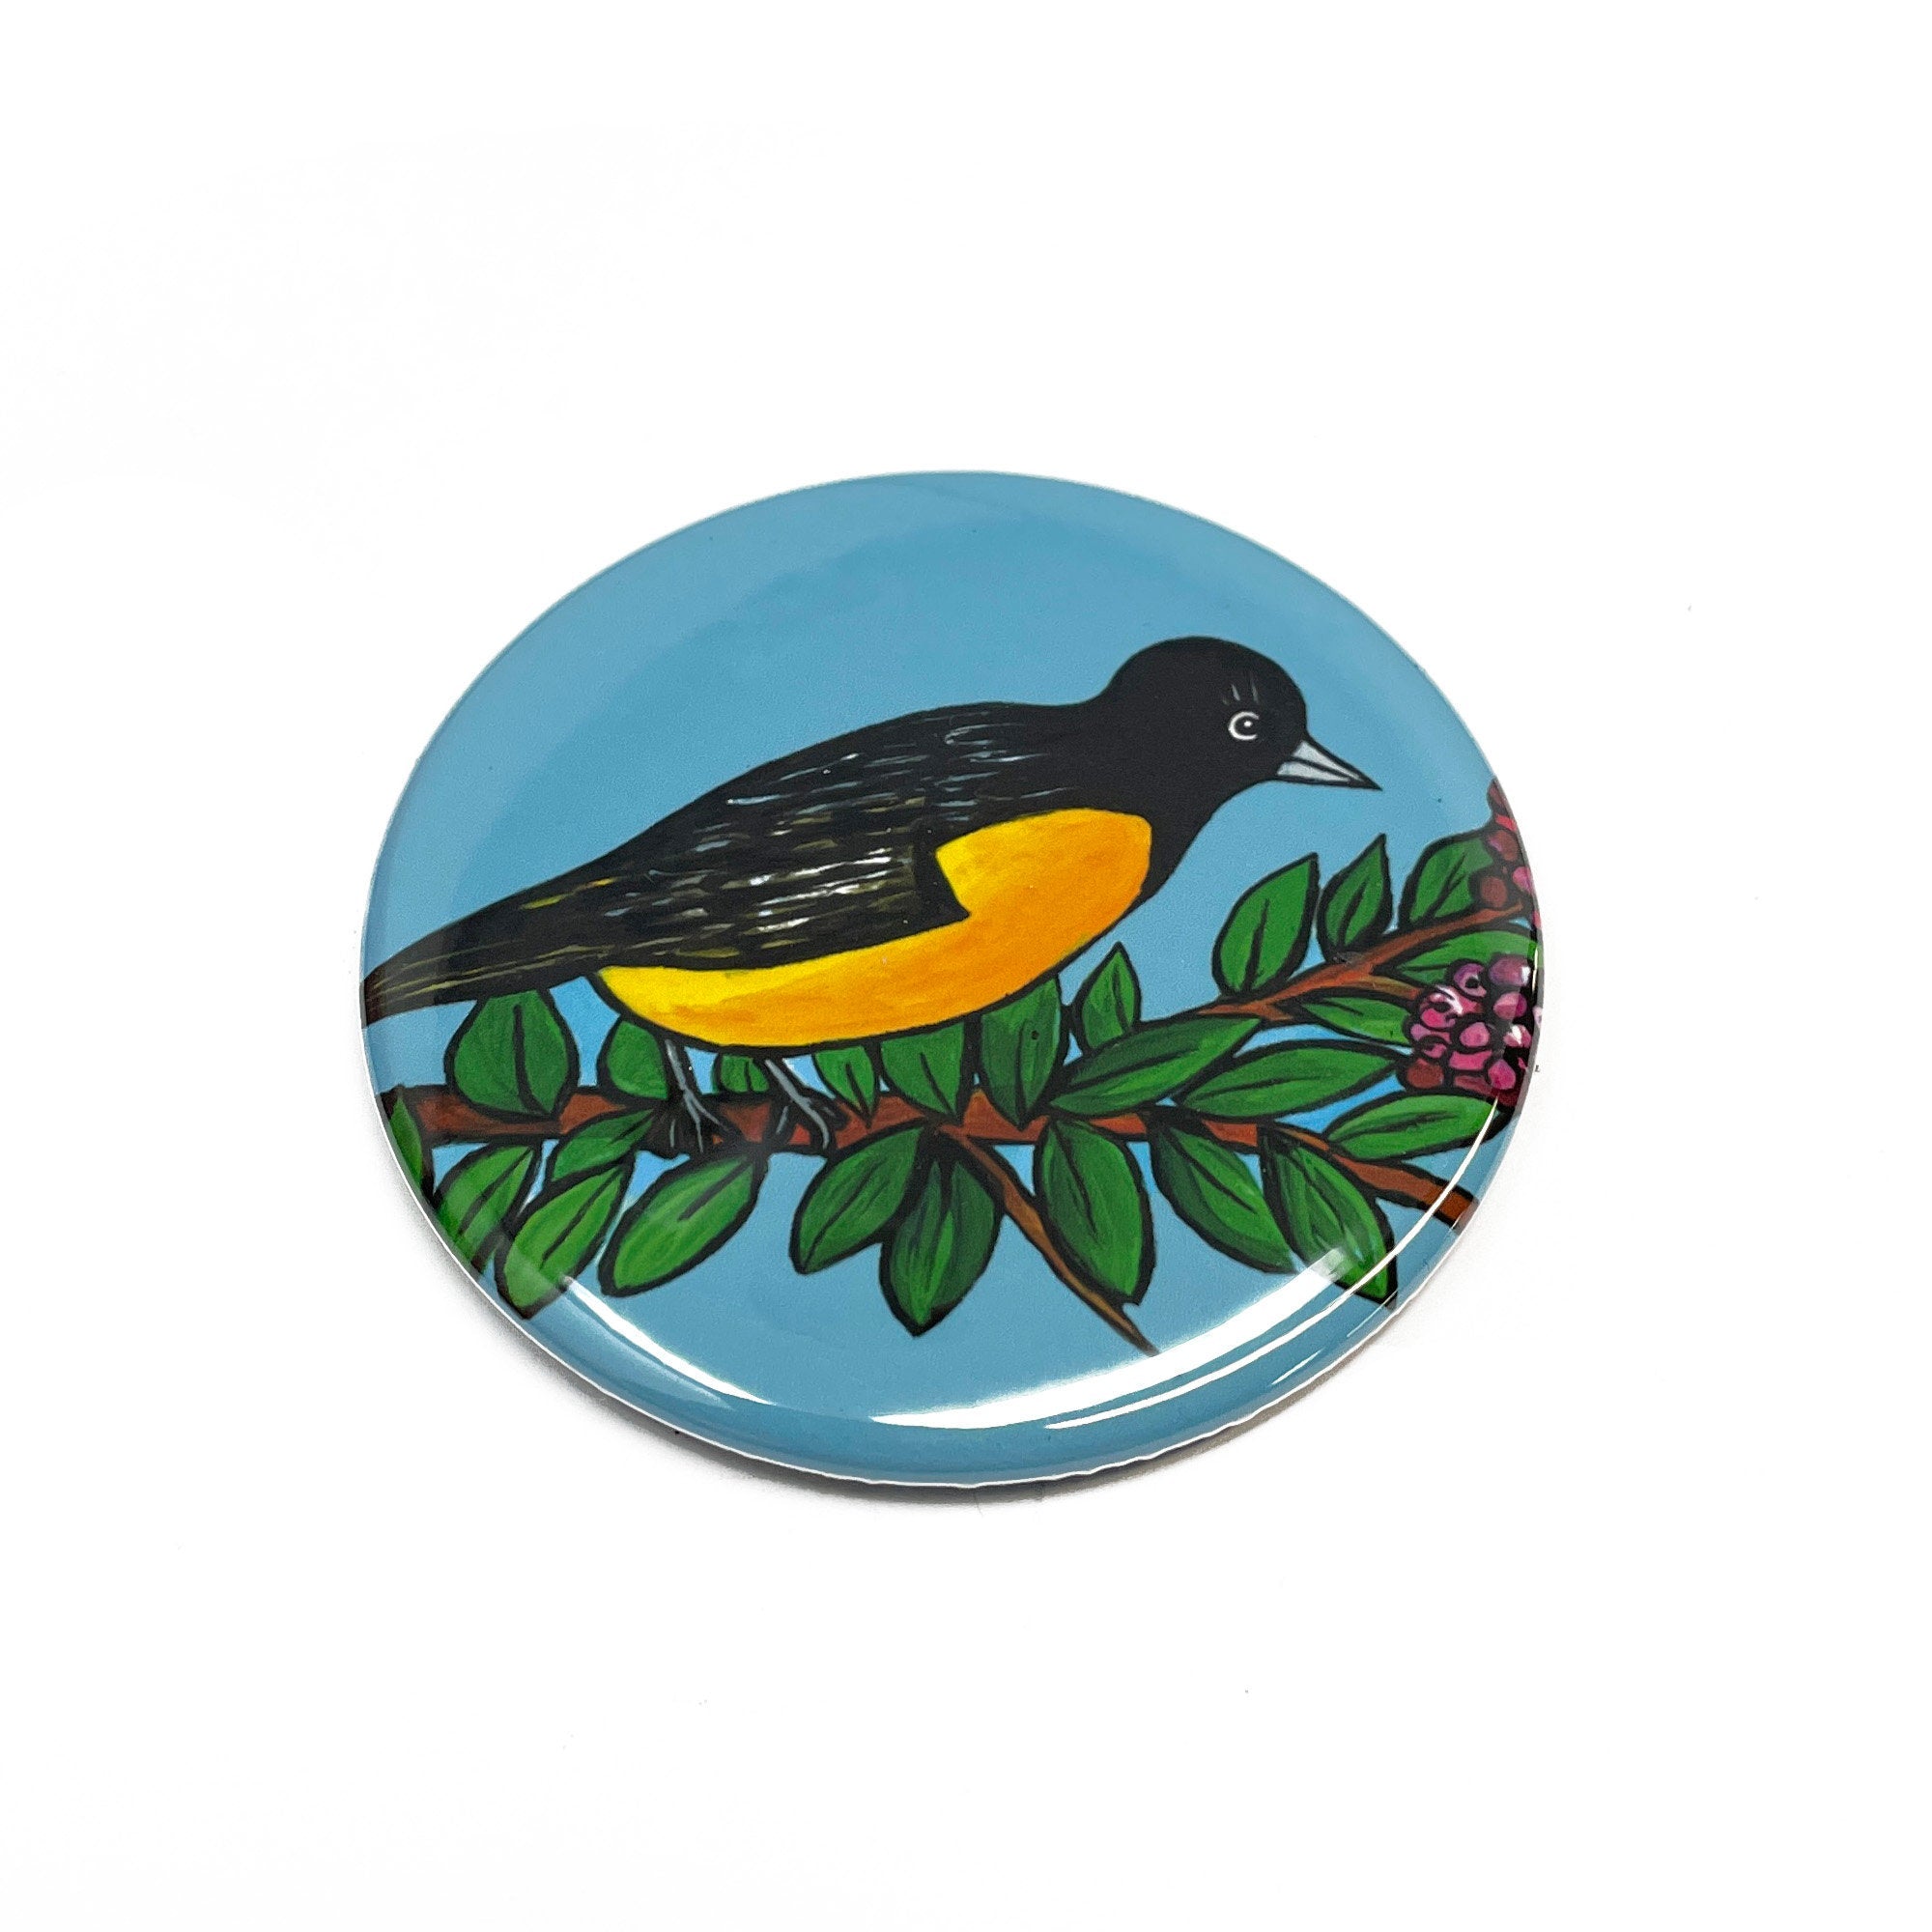 Oriole Magnet, Pin Back Button, or Pocket Mirror - Cute Bird Magnet or Pinback Badge